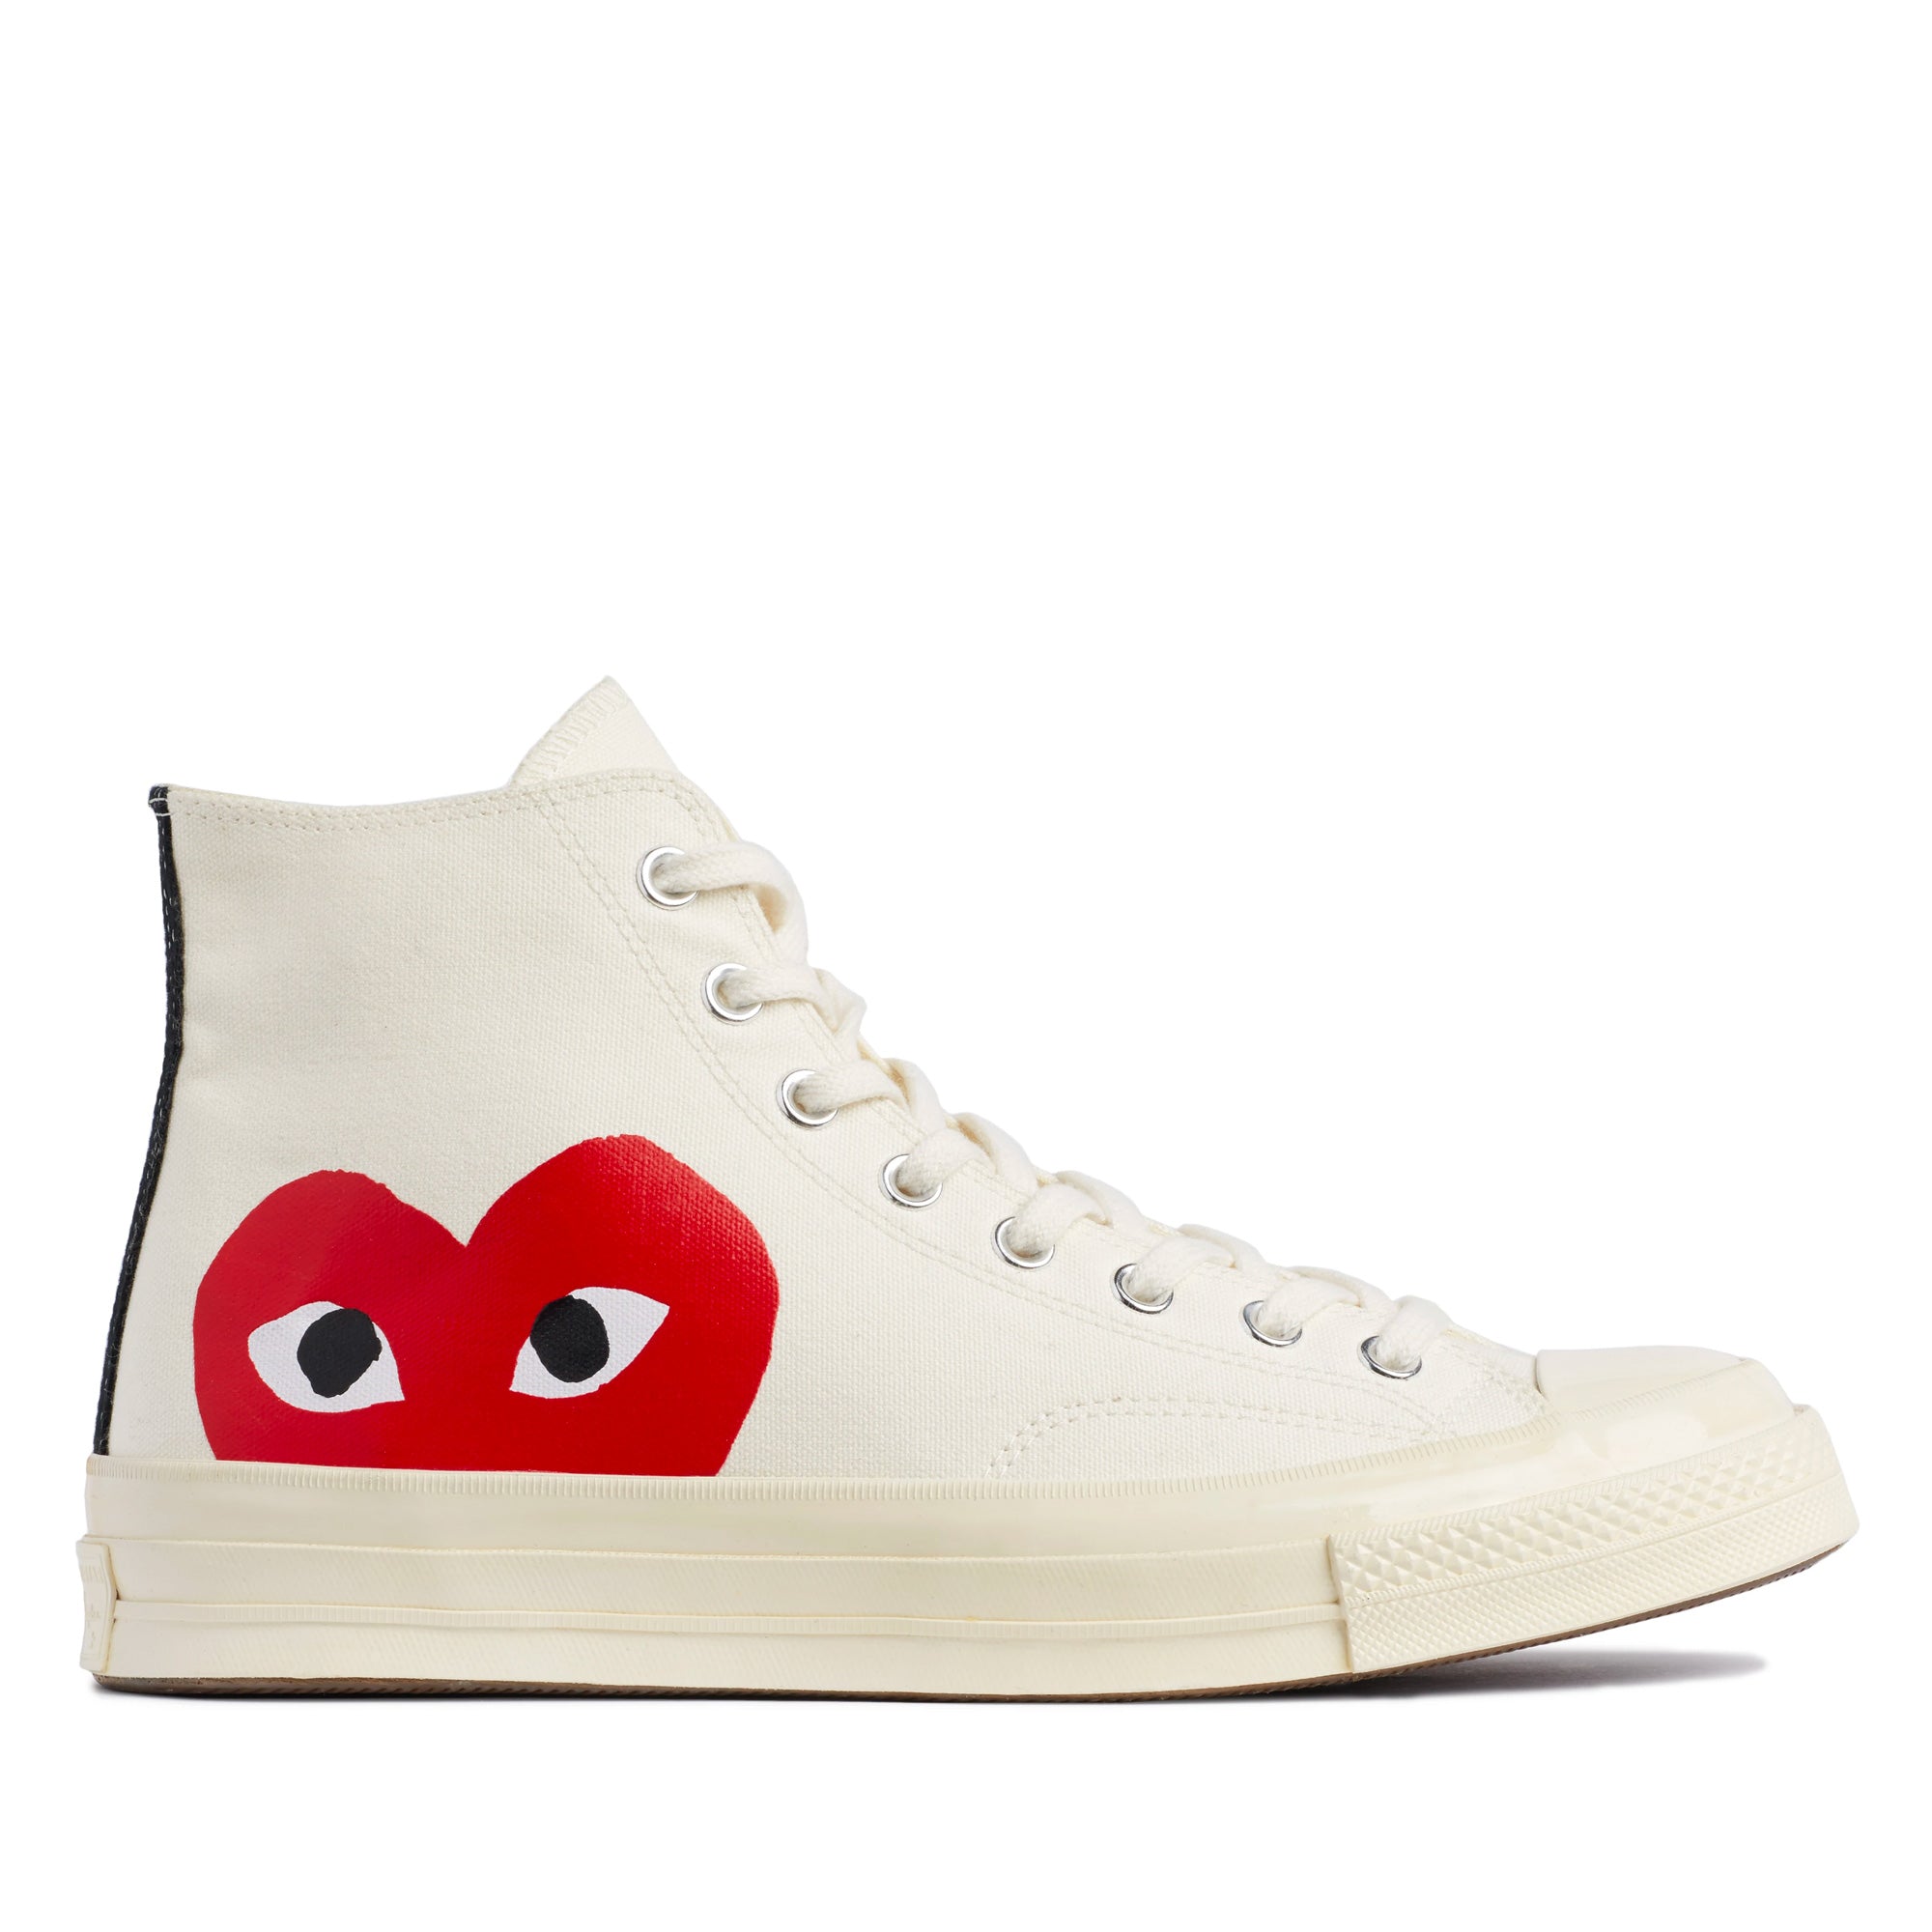 Katastrophe Teilweise Telegraph converse with red love heart Säugetier ...